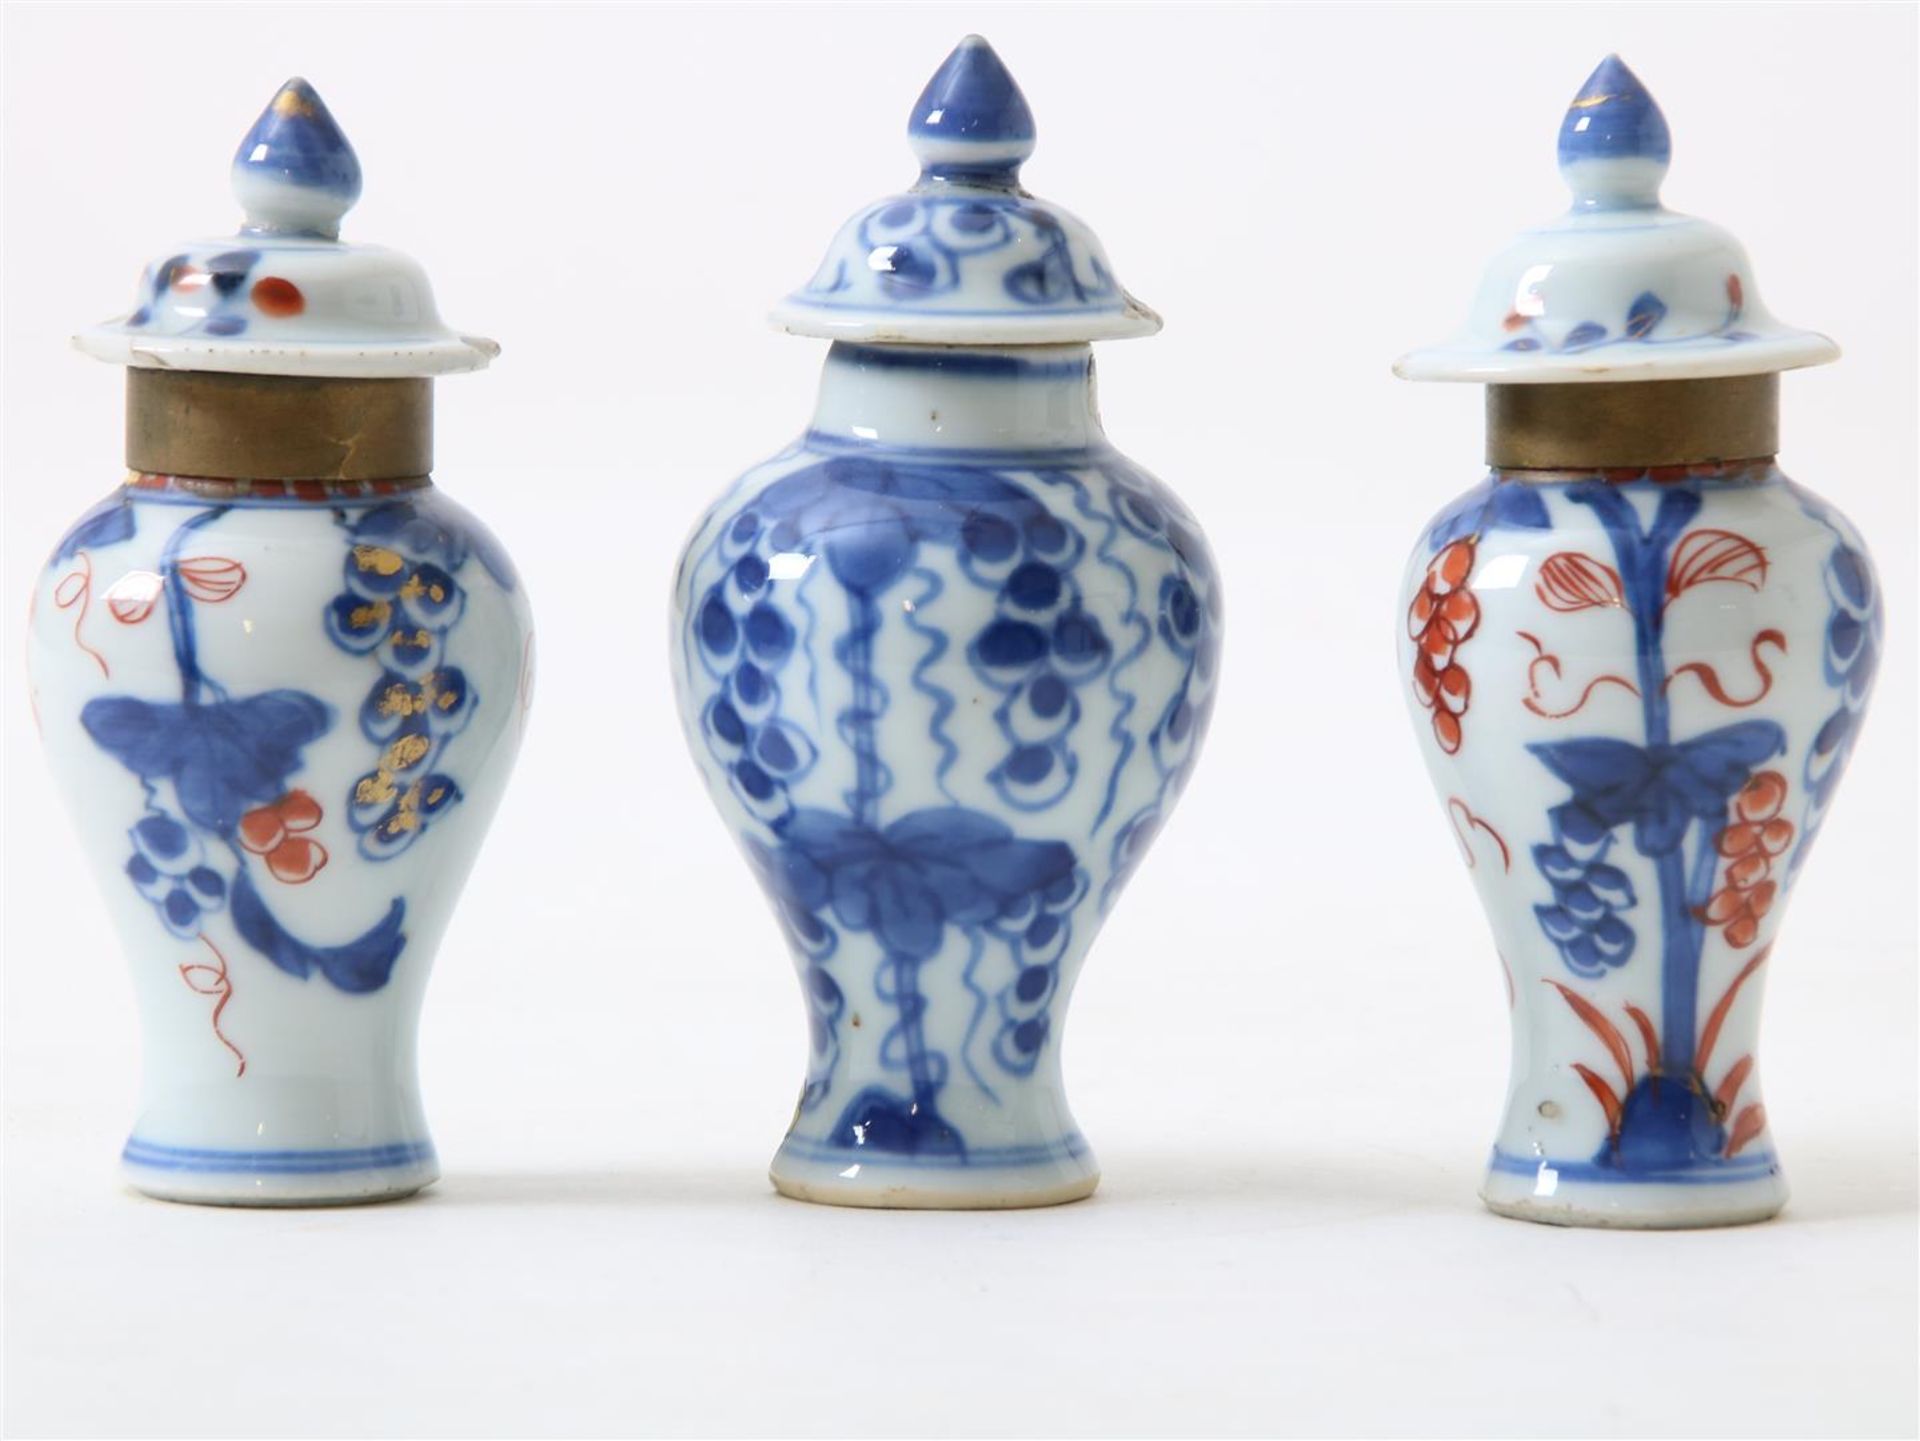 Set of porcelain miniature lidded vases with floral decor, height 10 cm. (edge restored and lids